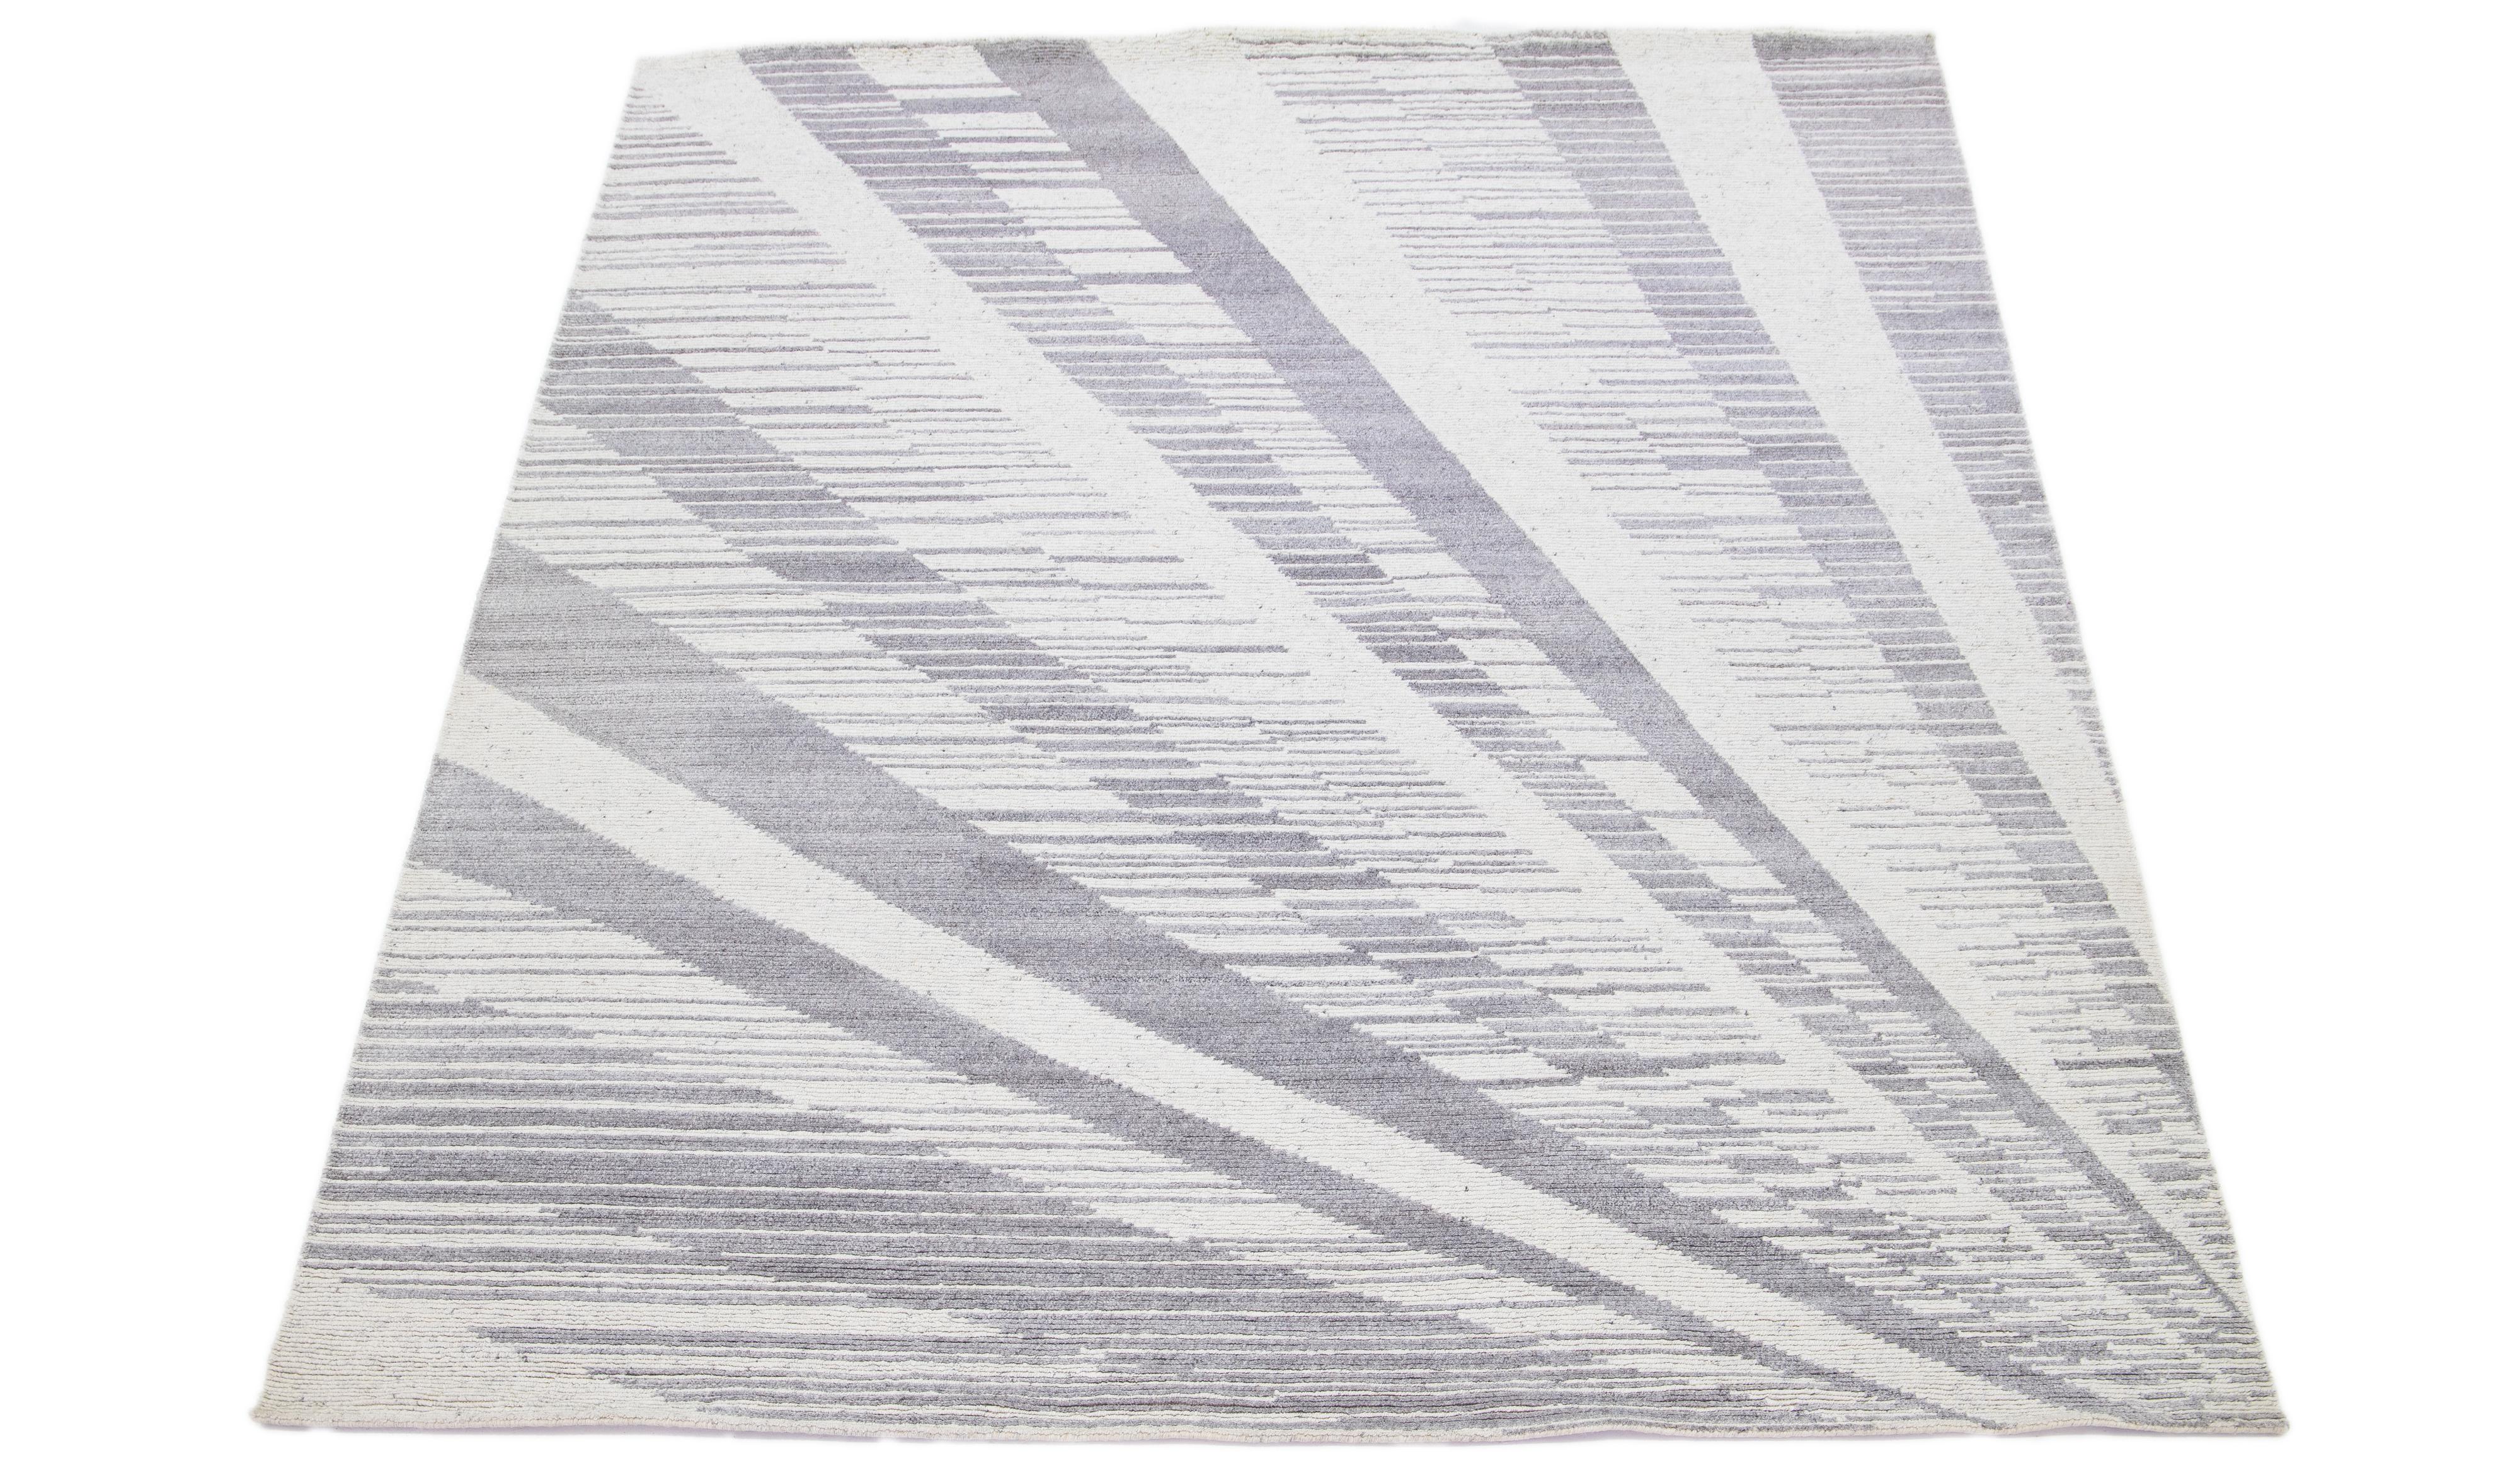 This modern wool rug showcases an abstract gray field with decorative ivory. The all-over design exemplifies the spirit of modernism in the 21st century, making it a truly sophisticated and fashionable addition to any interior setting.

This rug